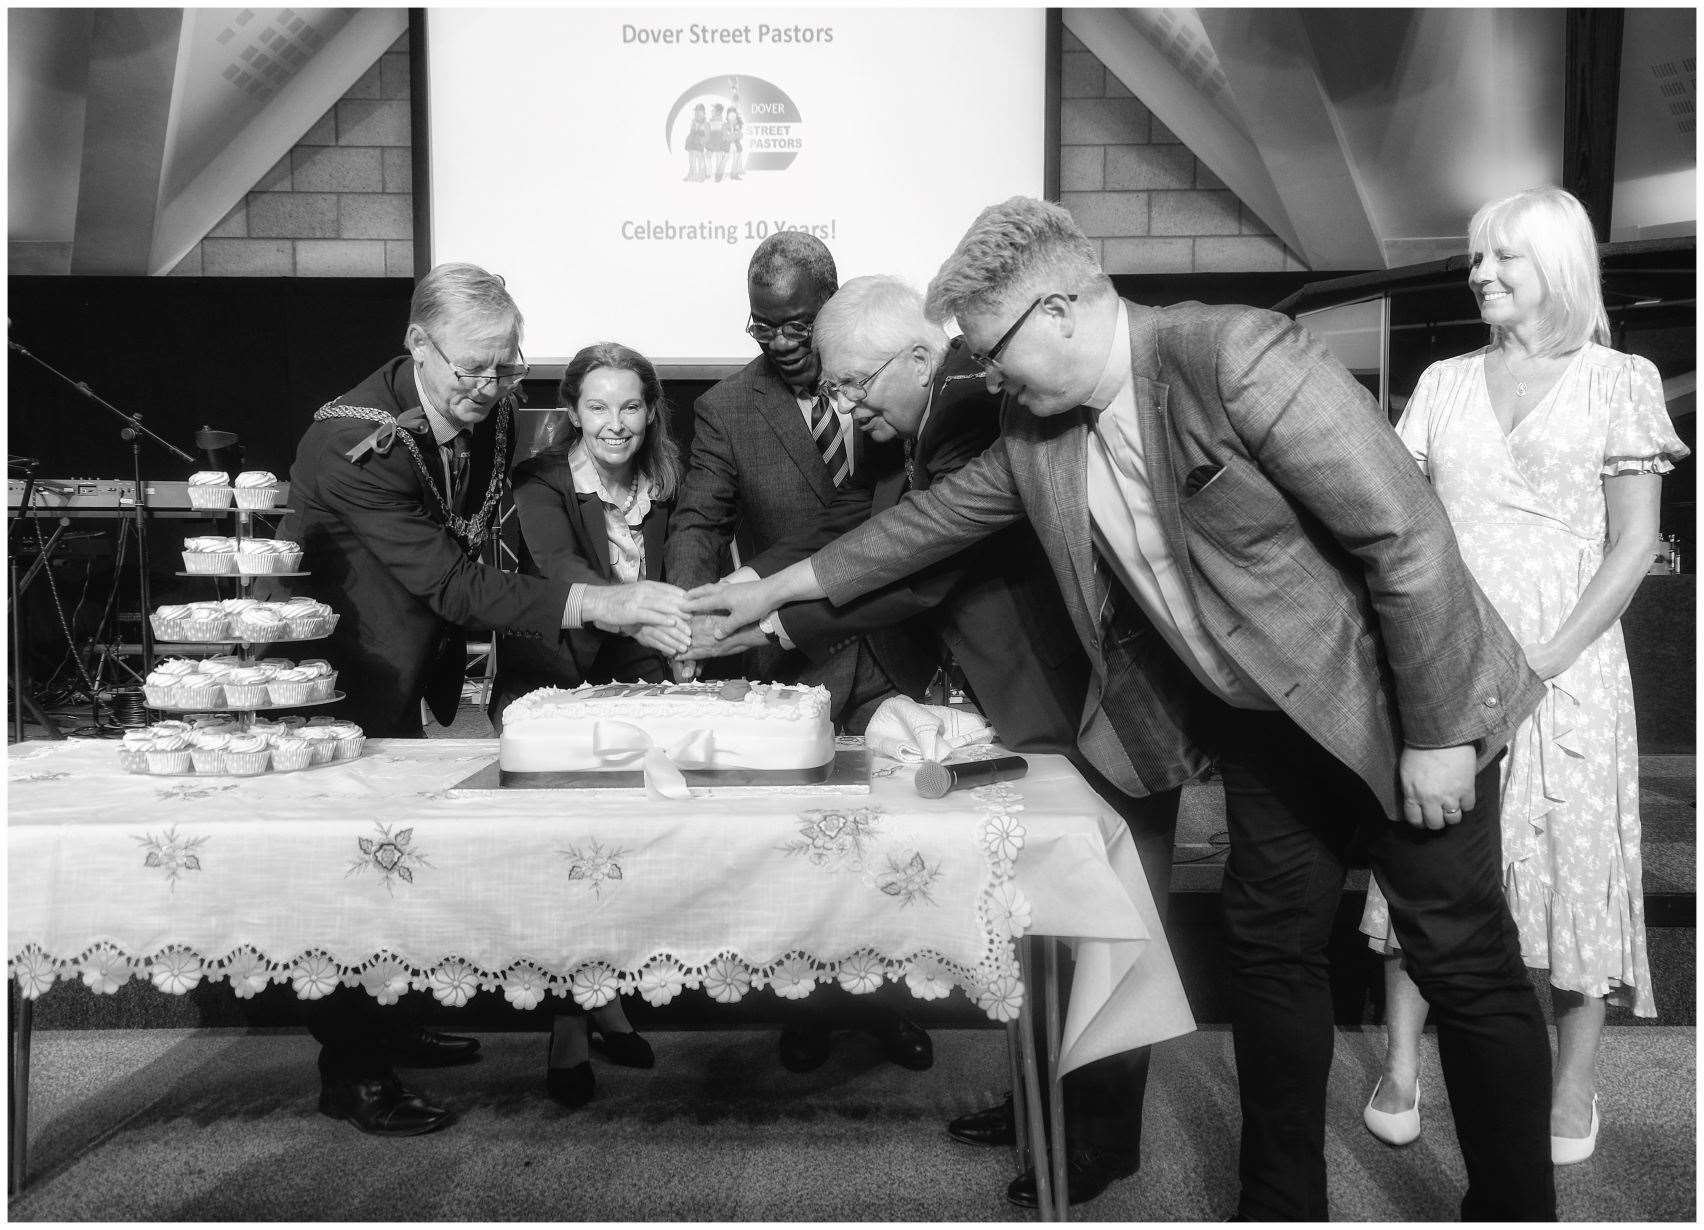 The cake cutting for the anniversary celebration. Picture by Marie McMonagle